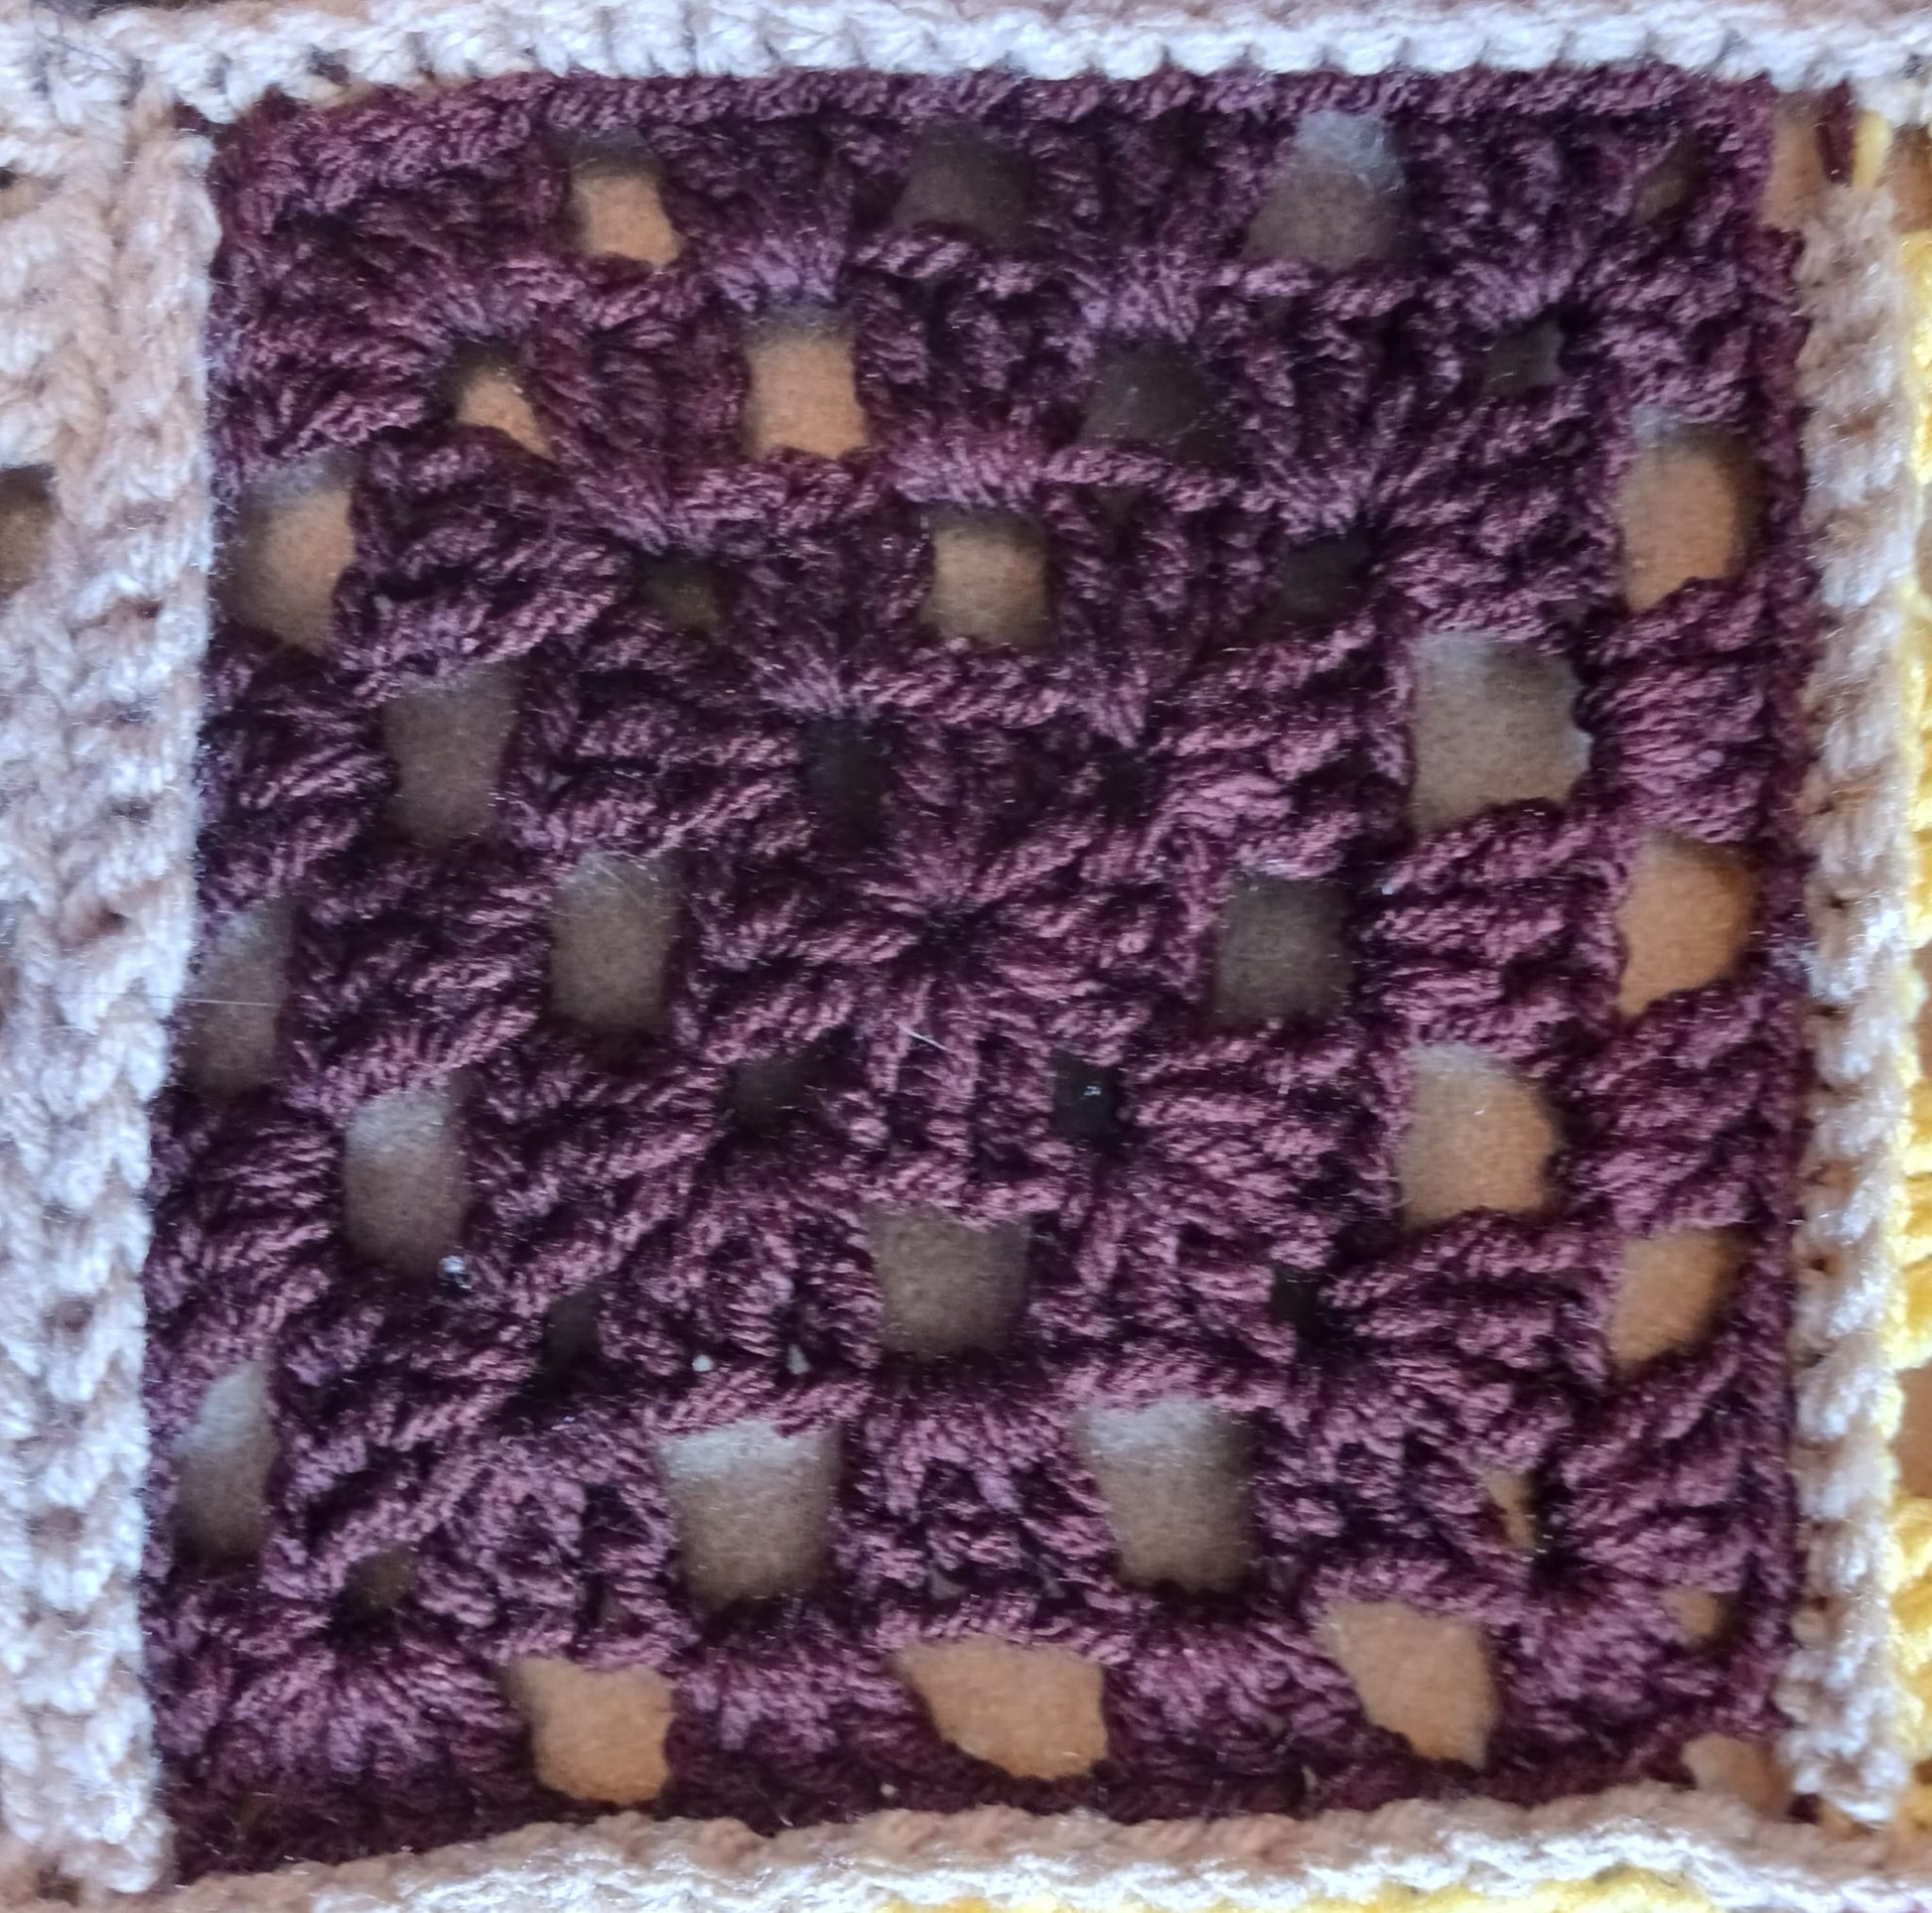 Earth Colours Patchwork Knit Blanket at AuntHill.ca